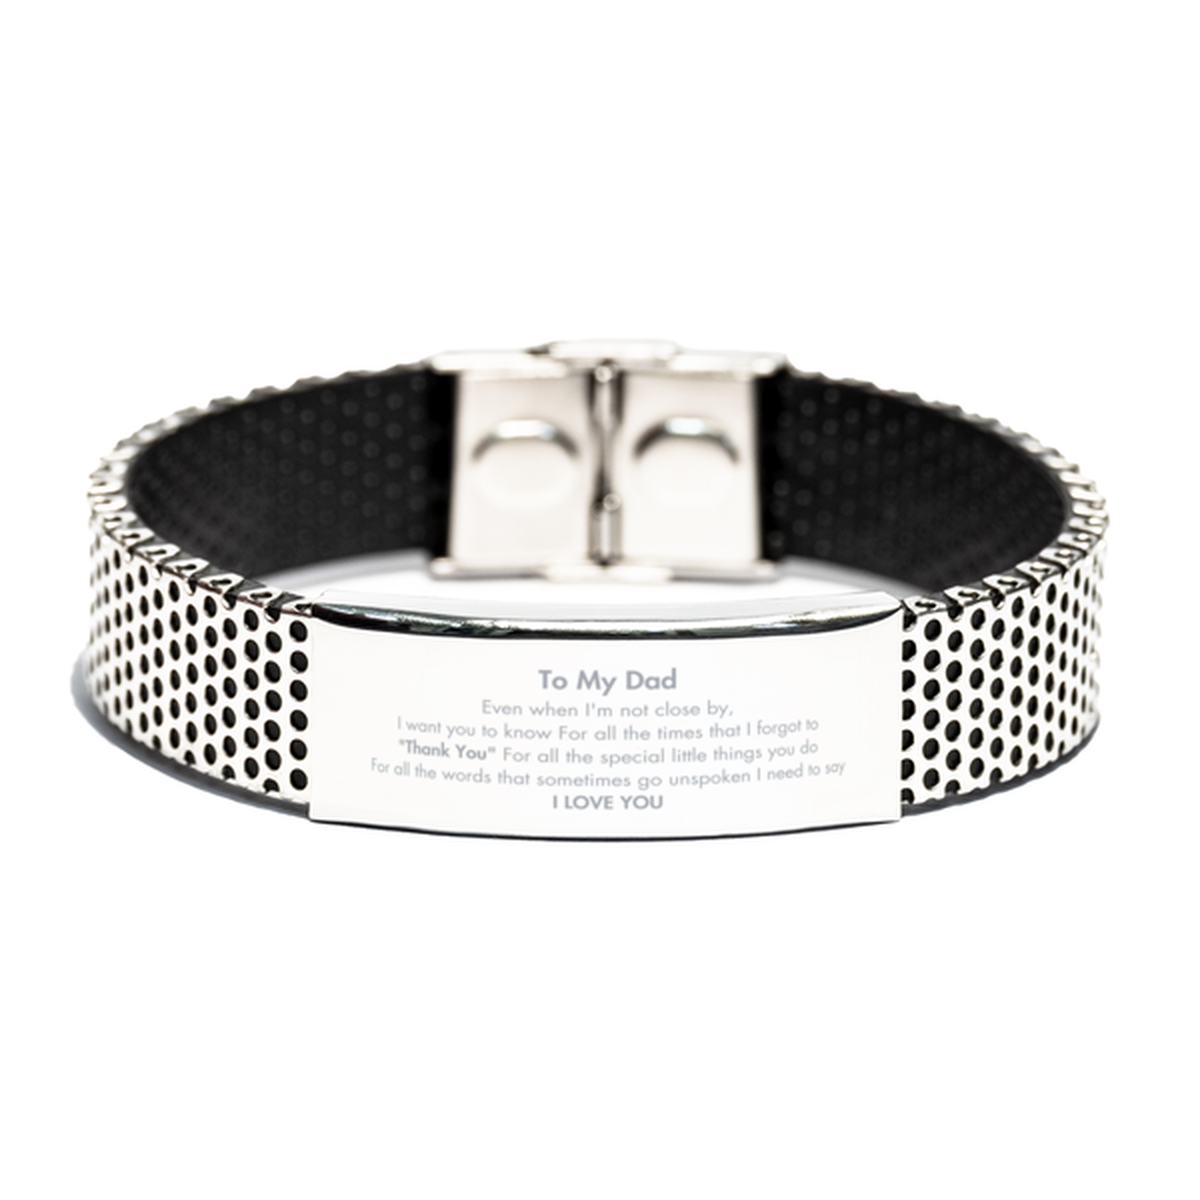 Thank You Gifts for Dad, Keepsake Stainless Steel Bracelet Gifts for Dad Birthday Mother's day Father's Day Dad For all the words That sometimes go unspoken I need to say I LOVE YOU